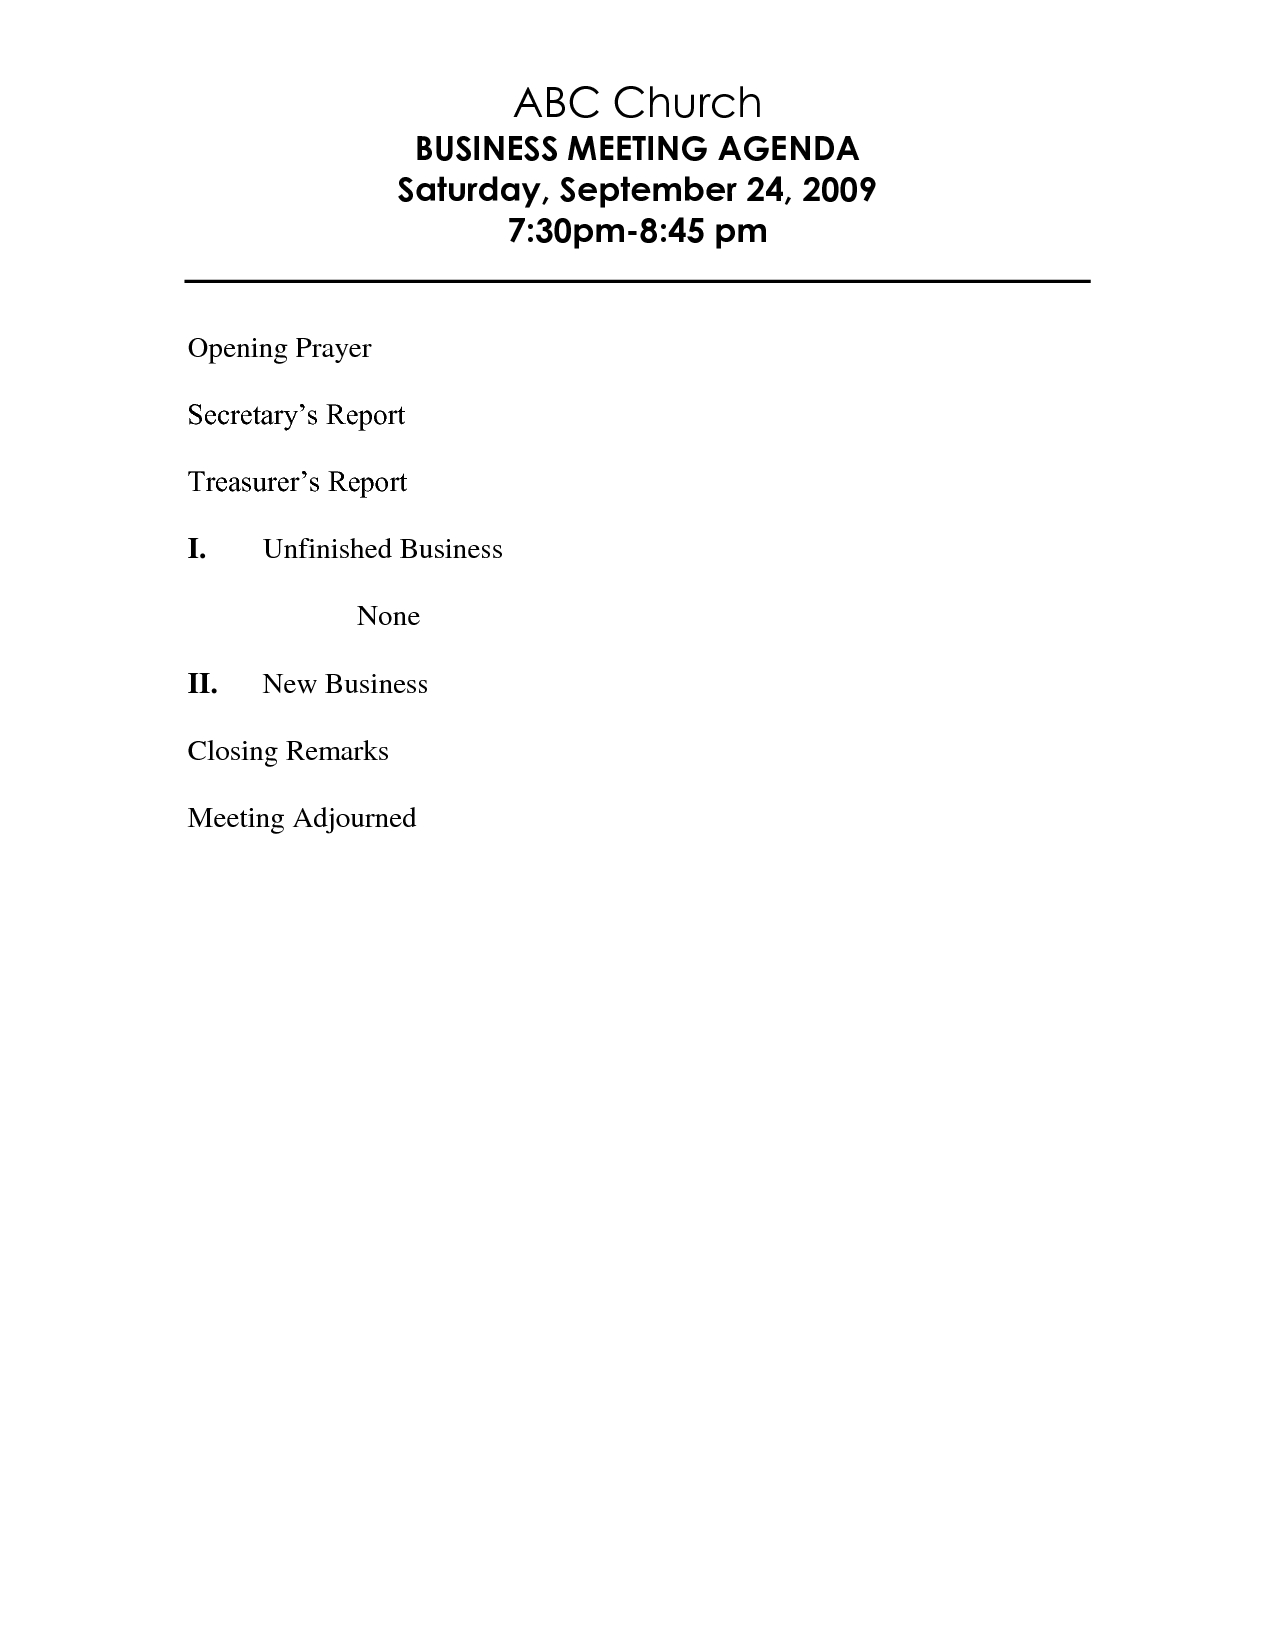 Stunning Church Business Meeting Agenda Template Sample in proportions 1275 X 1650